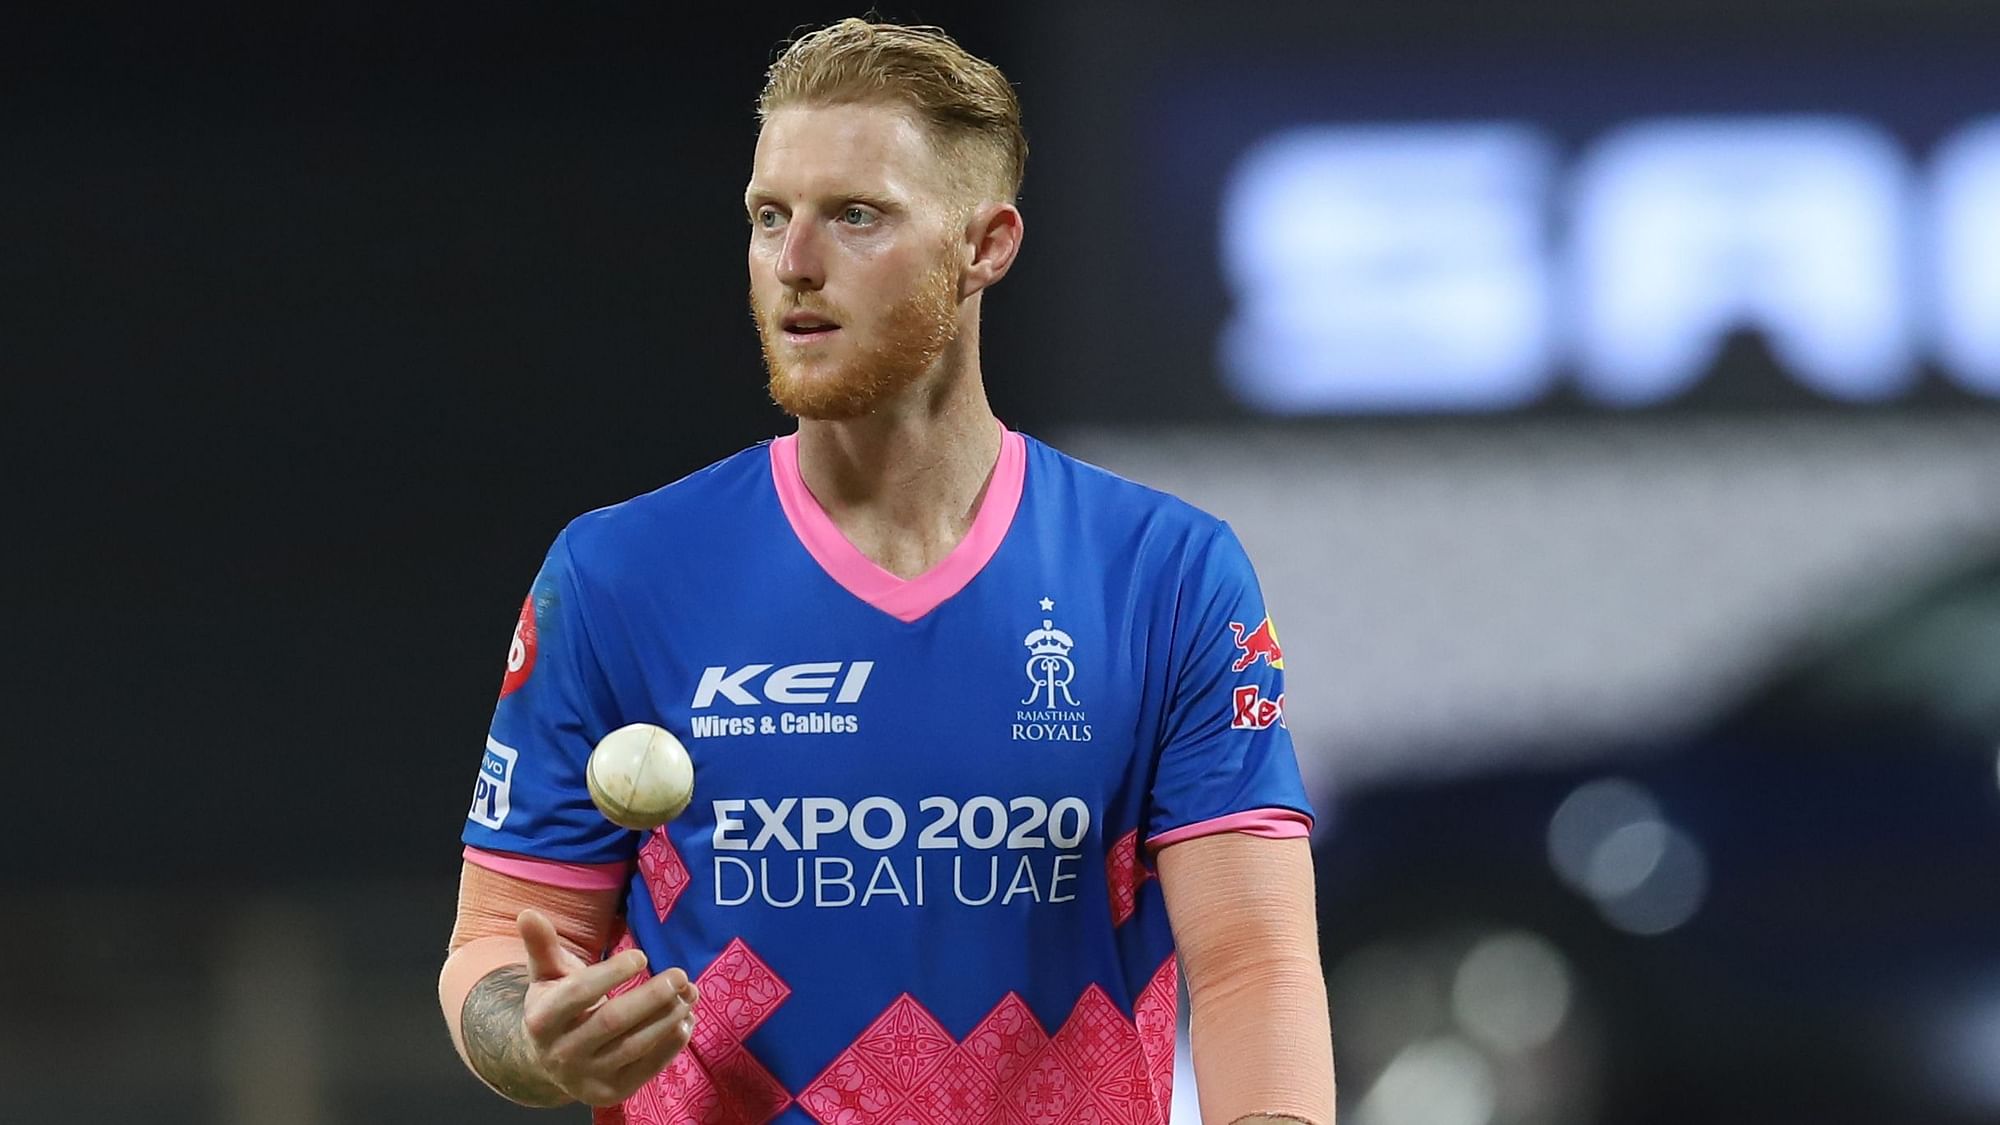 Ben Stokes suffered an injury in the opening game for Rajasthan Royals in IPL 2021 against Punjab Kings